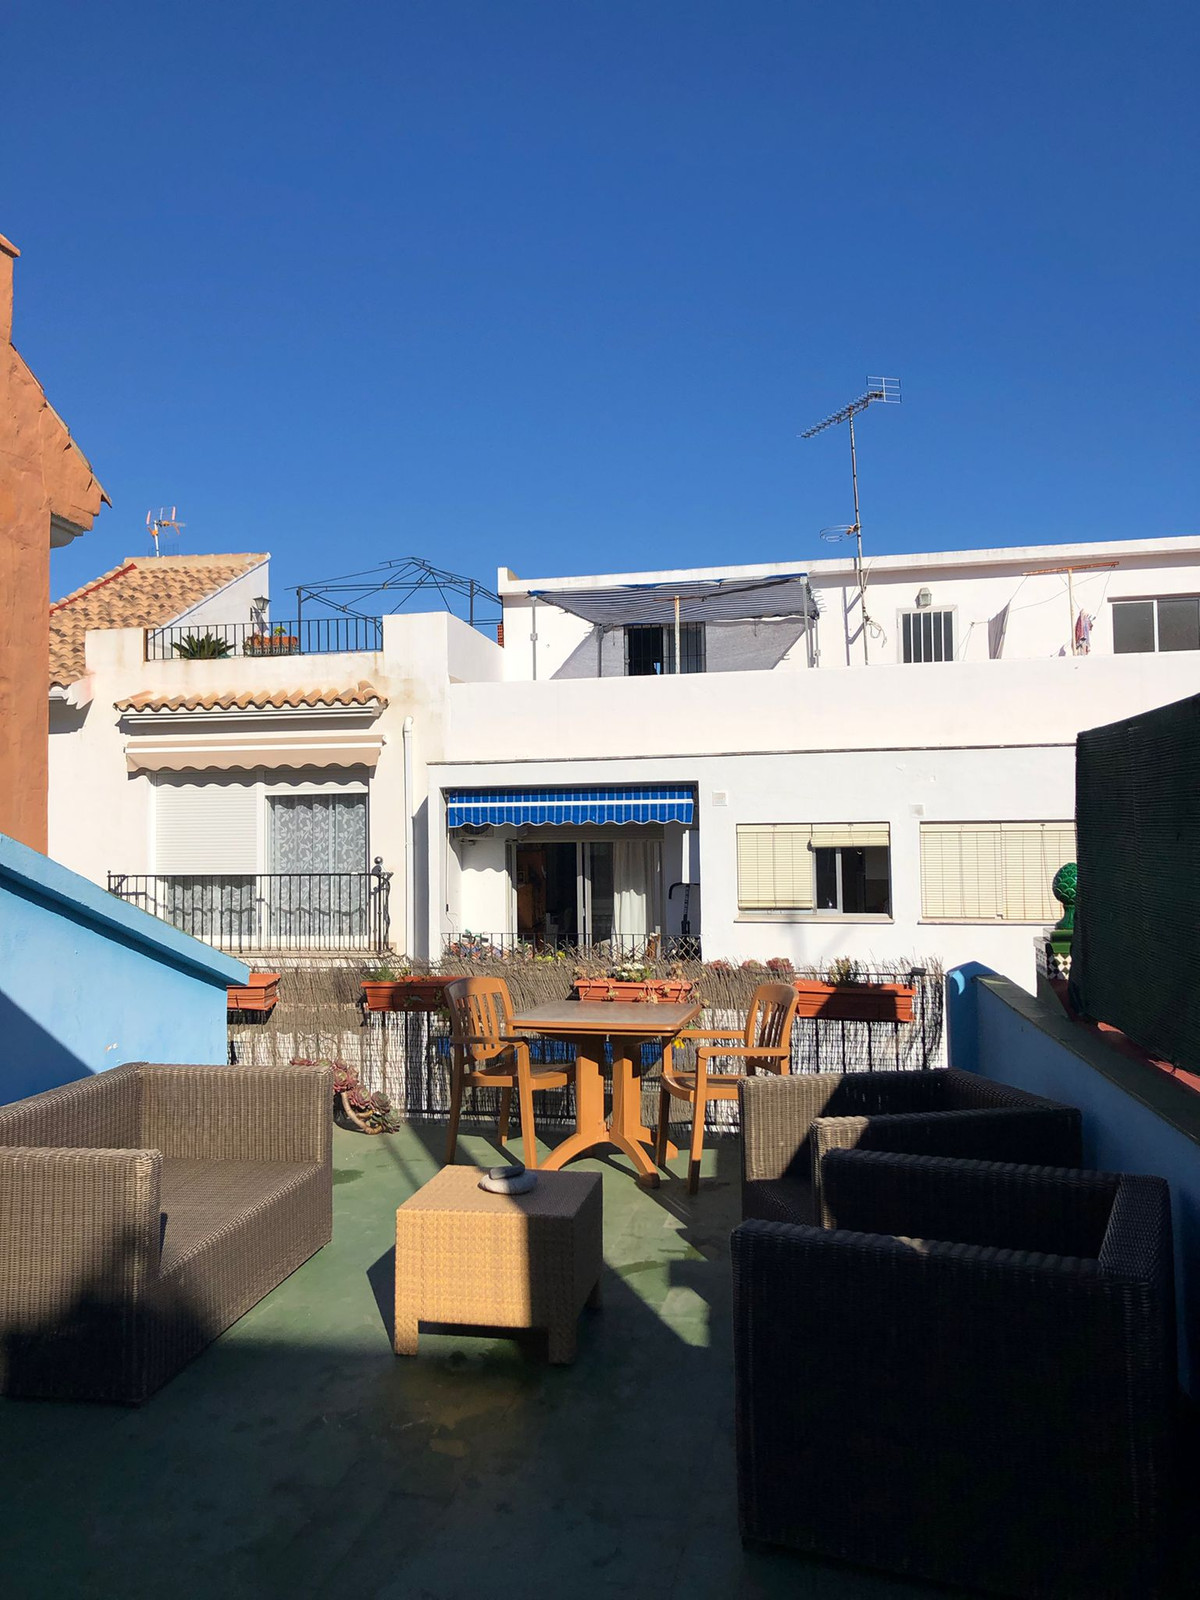 Properties for sale Malaga